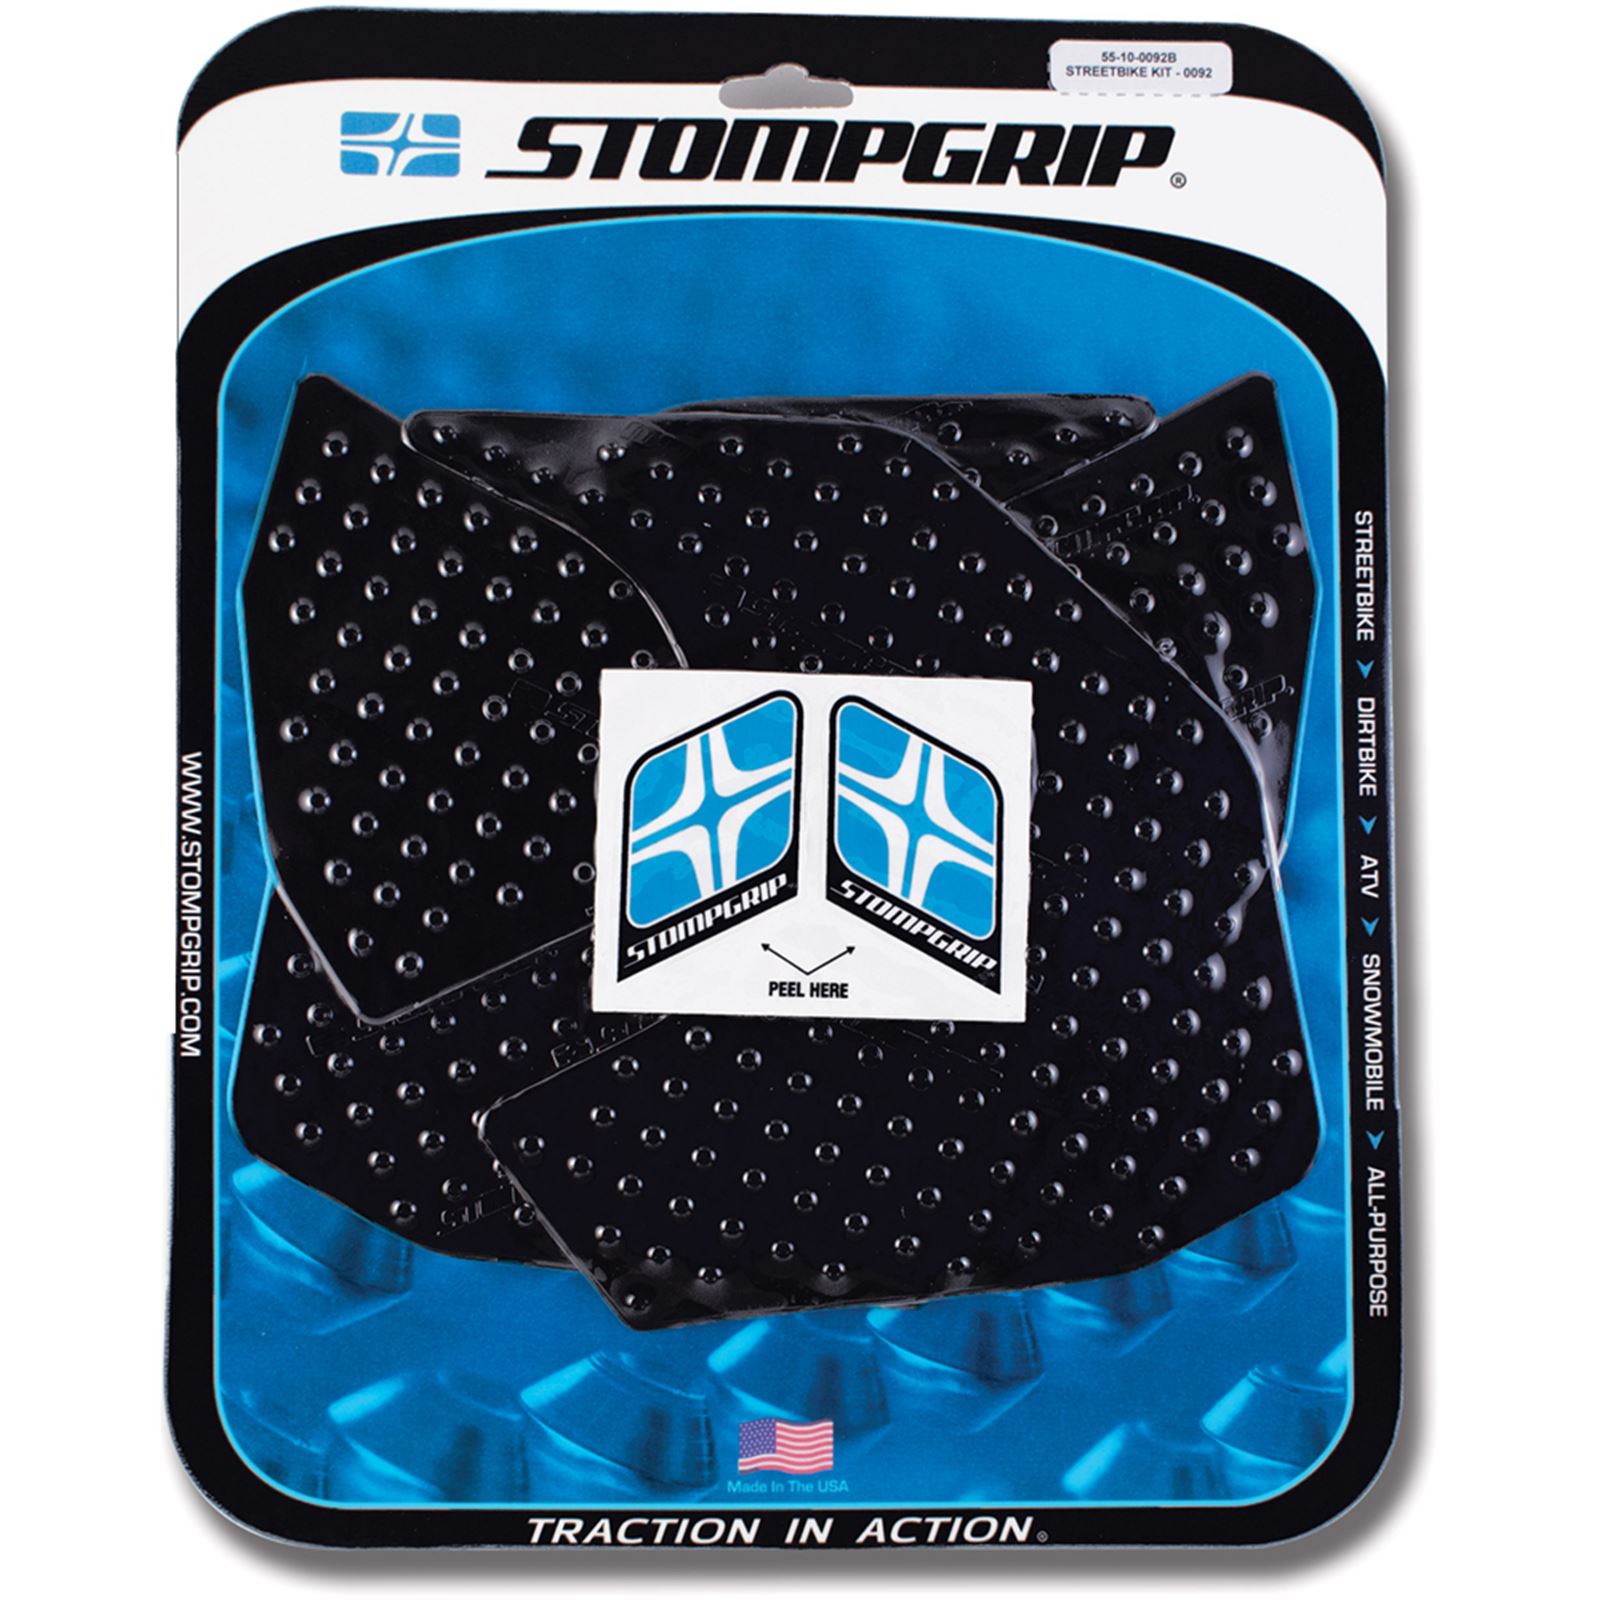 Stompgrip Street Traction Pad Motorcycle, ATV UTV  Powersports Parts  The Best Powersports, Motorcycle, ATV  Snow Gear, Accessories and More